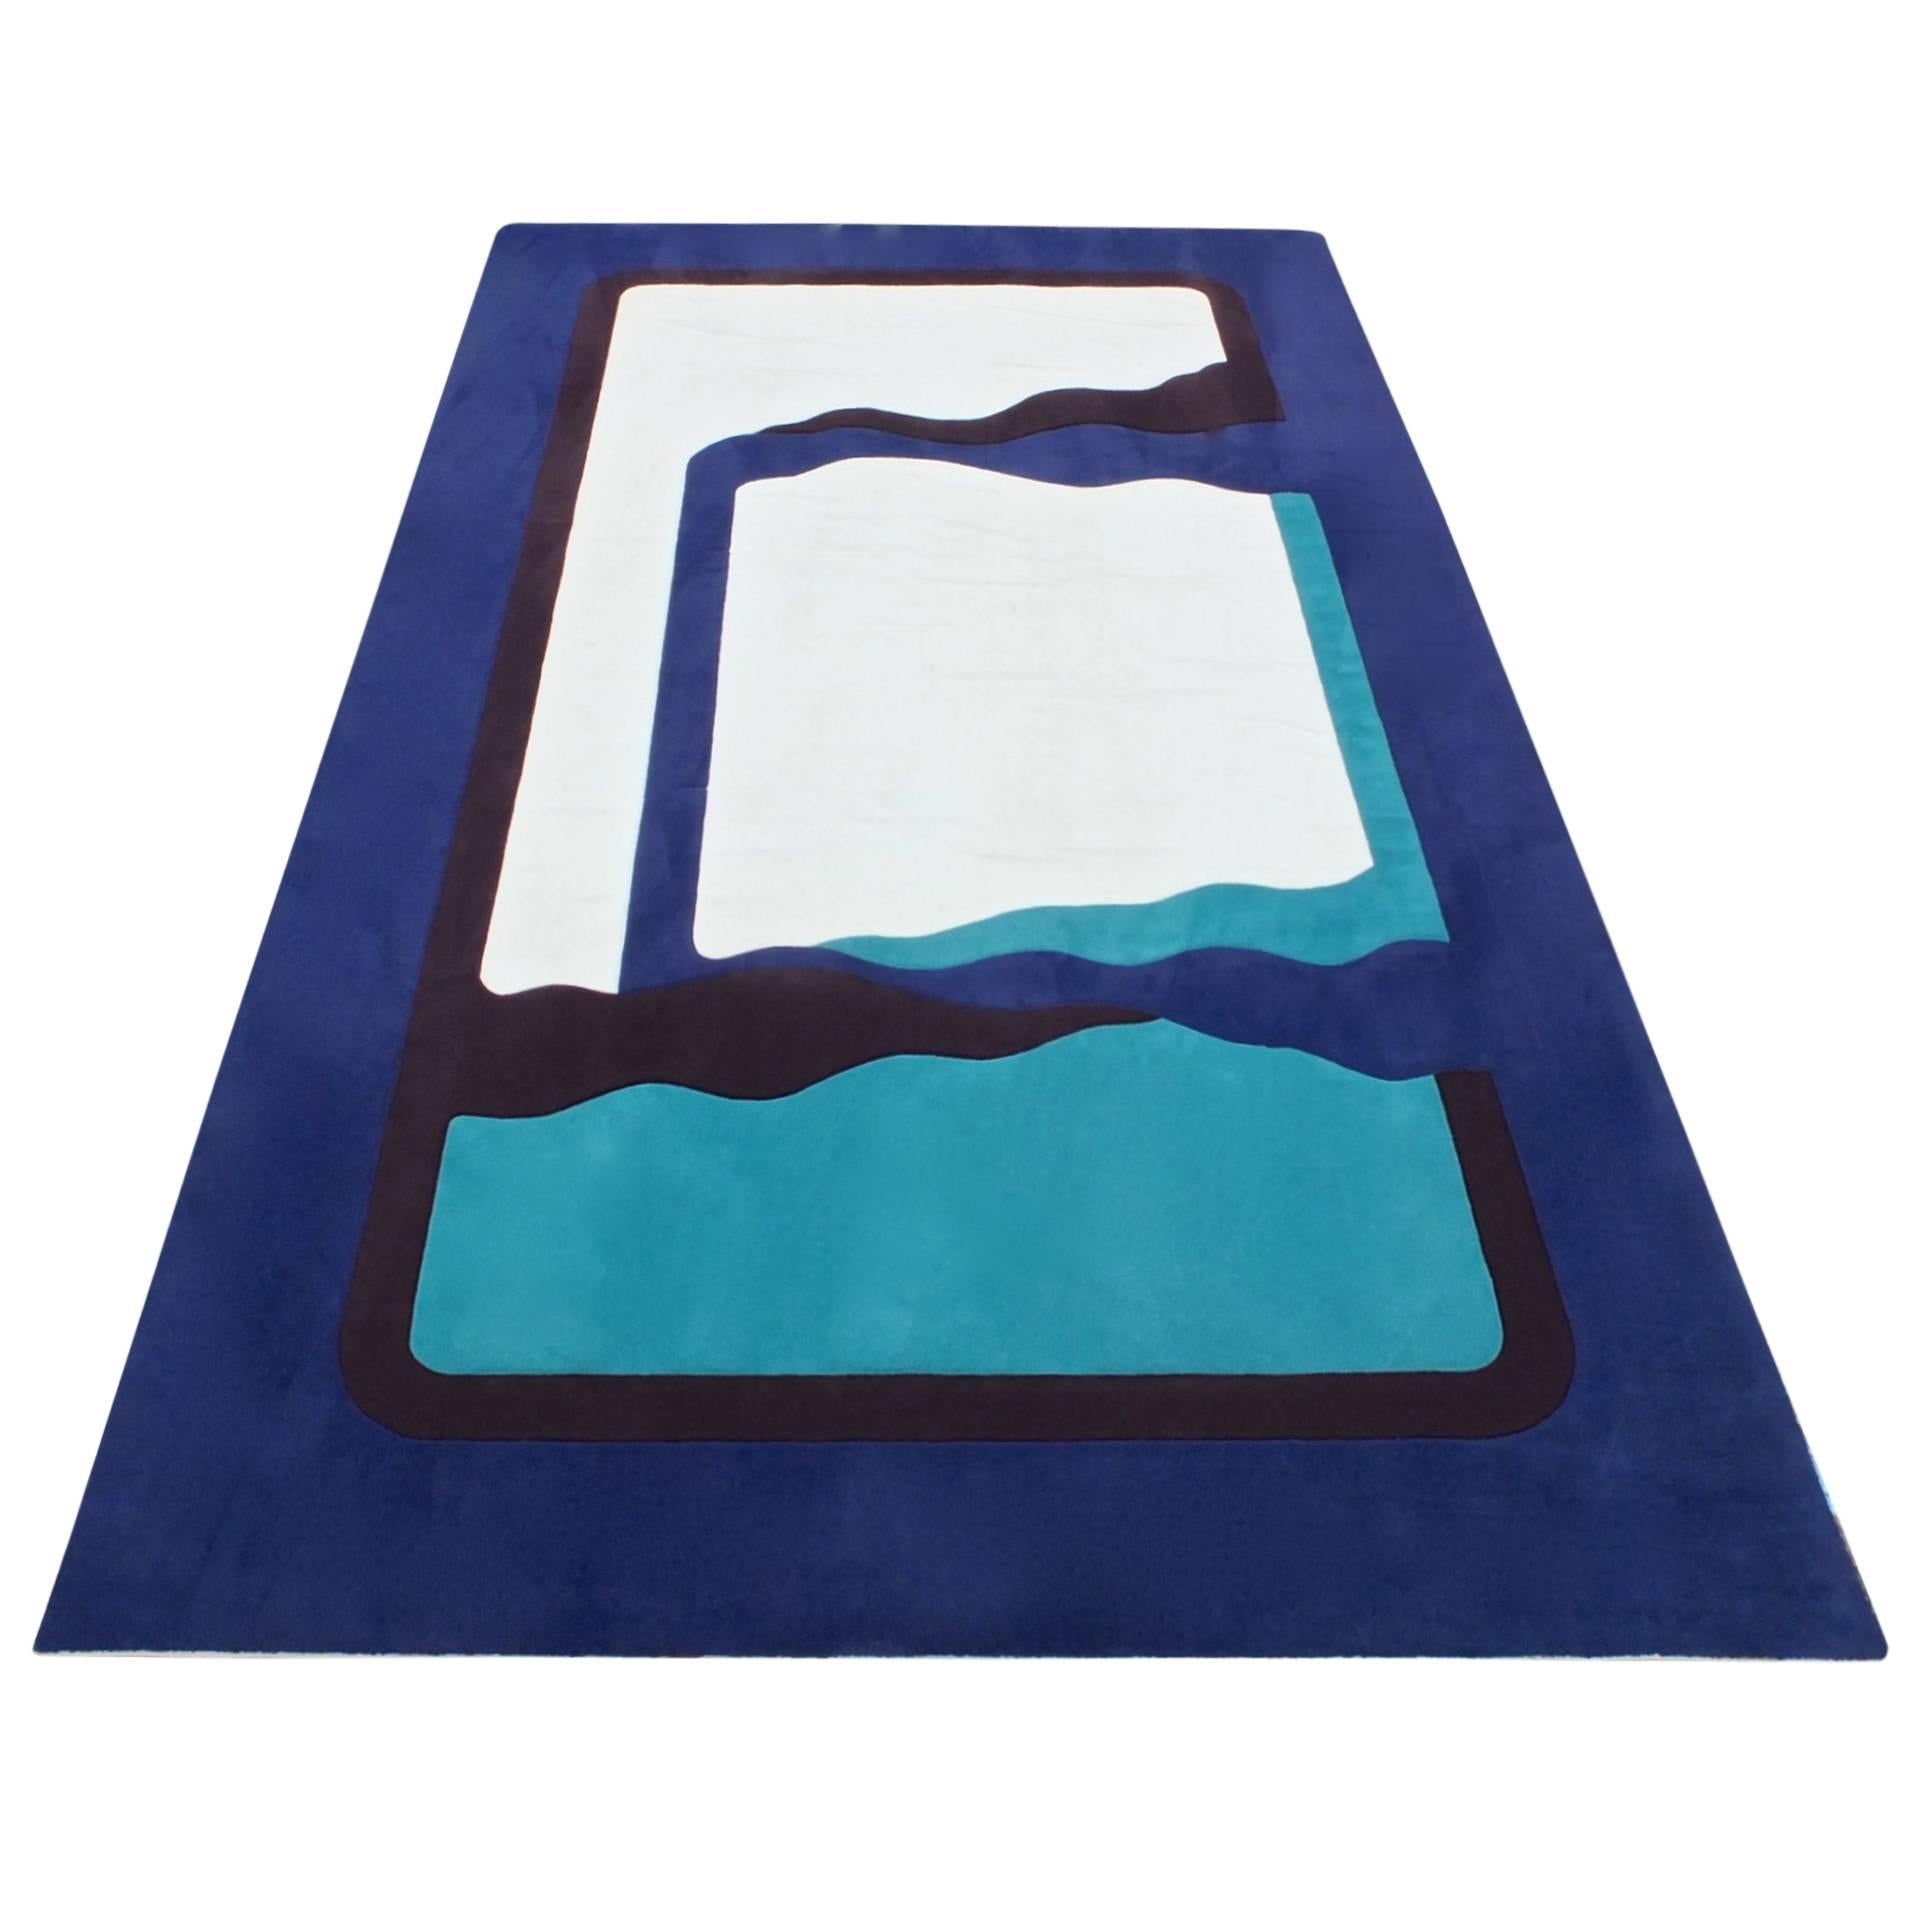 Abstract Wool Rug 10x17 in Style of Edward Fields